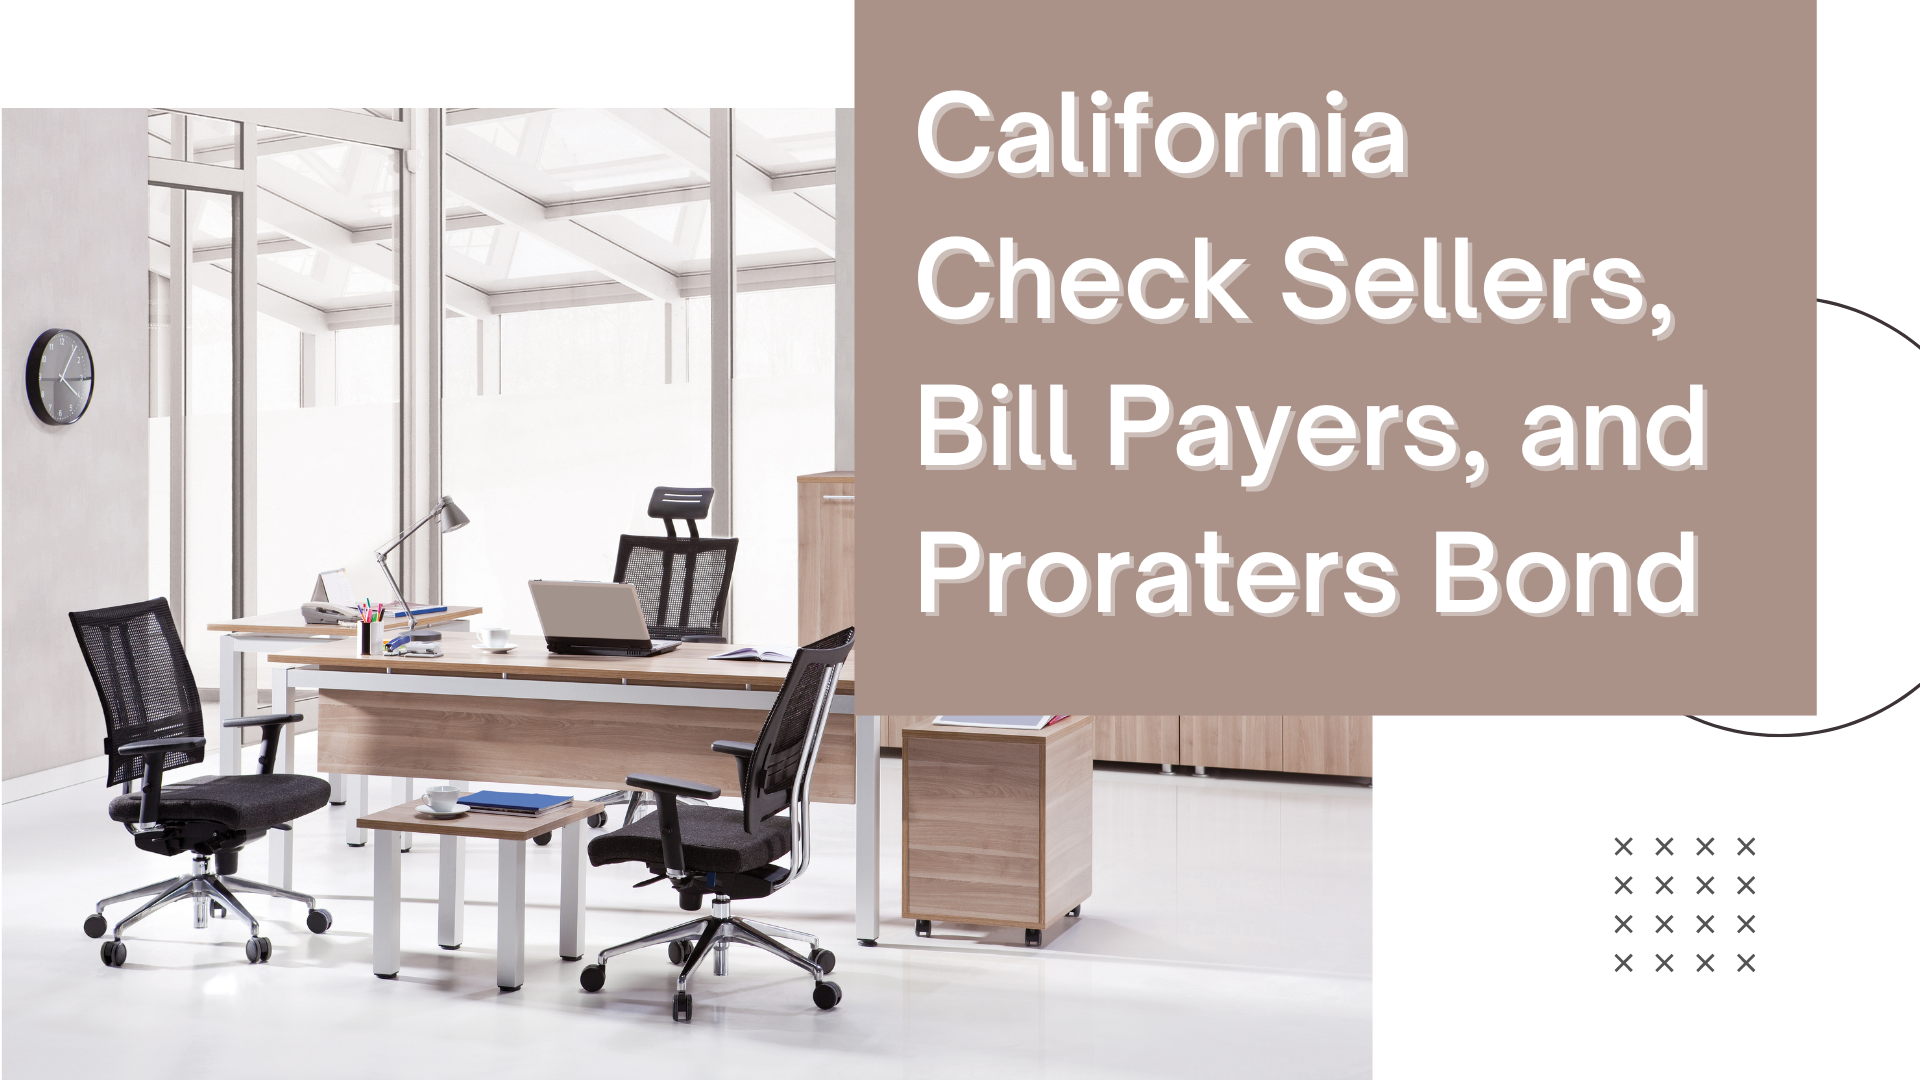 Surety Bond-California Check Sellers, Bill Payers, and Proraters Bond